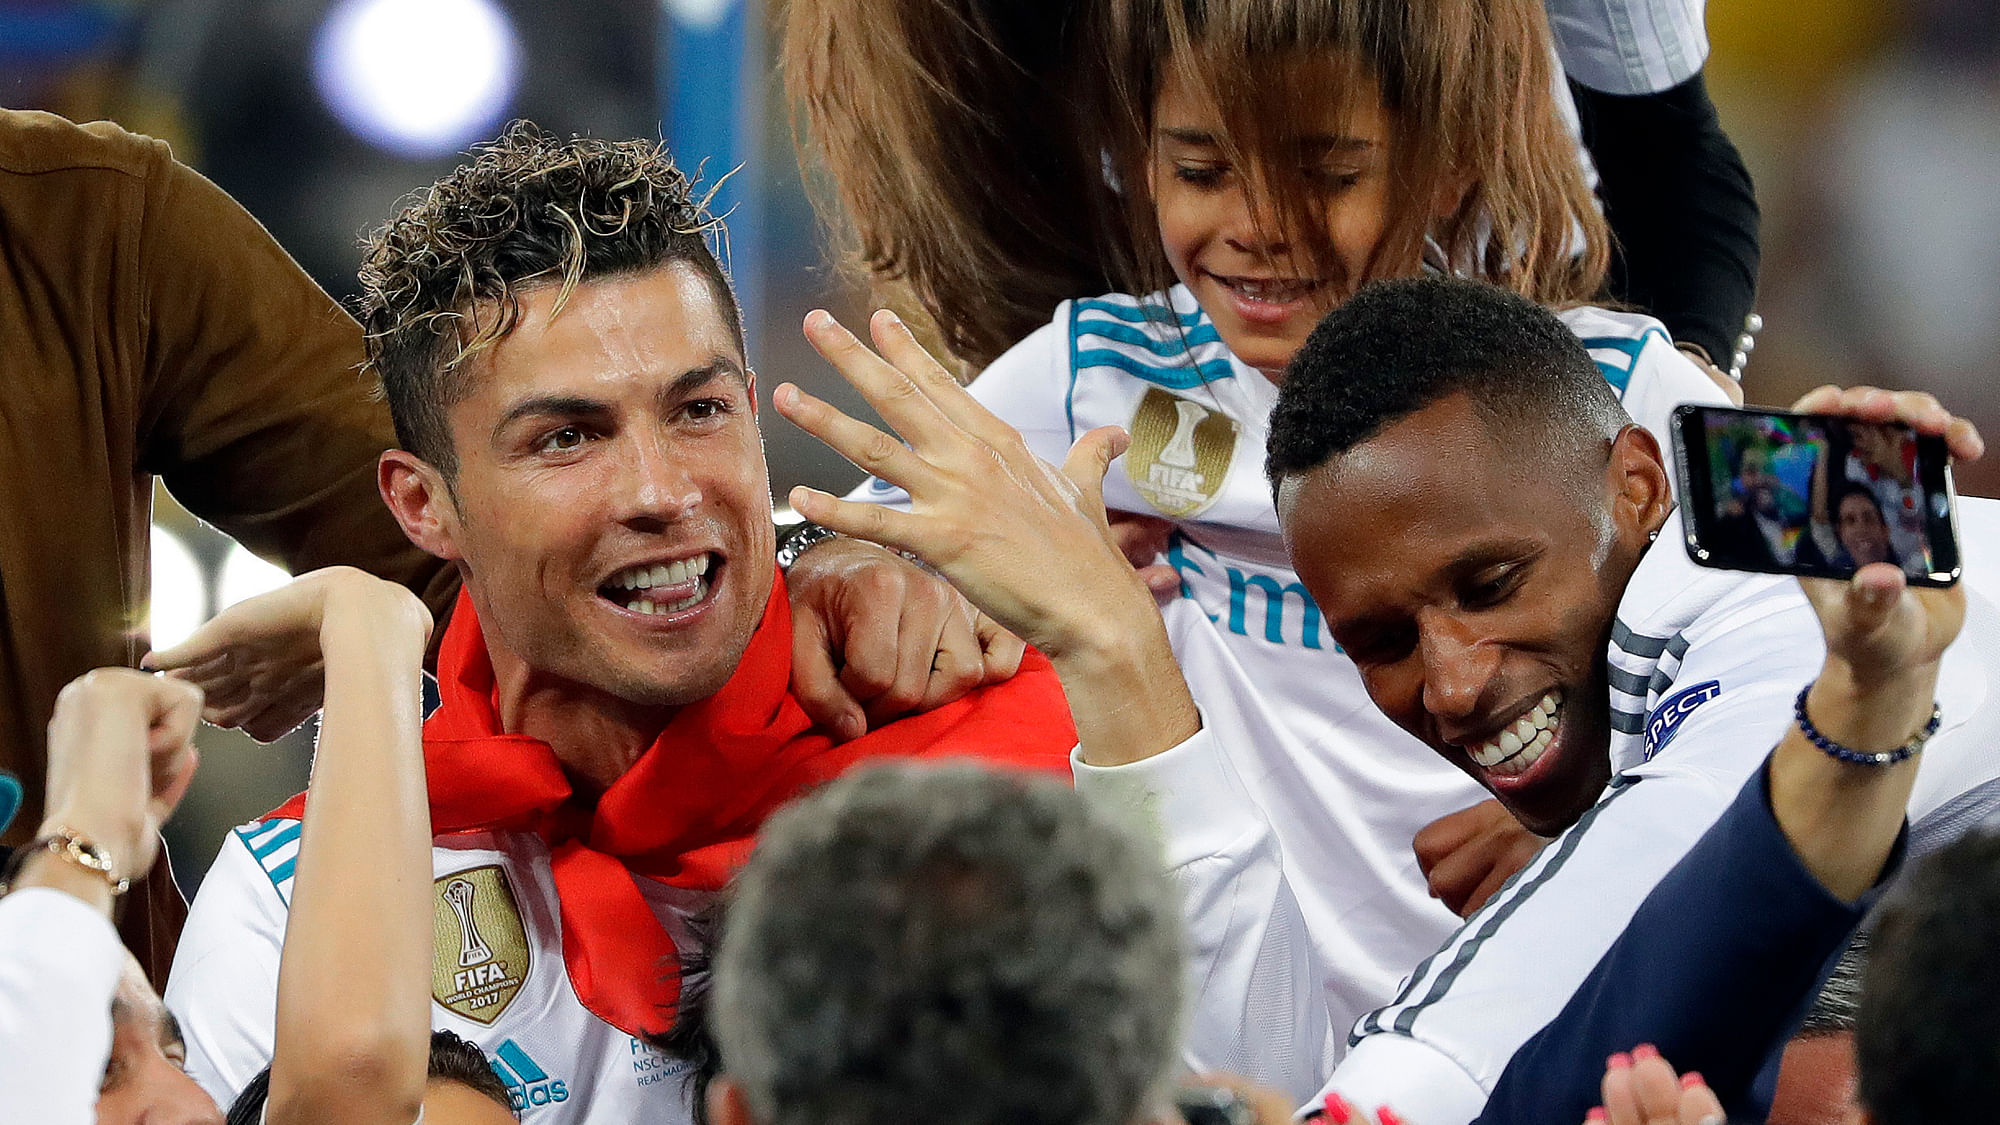 In this Saturday, May 26, 2018 file photo Cristiano Ronaldo celebrates with family after winning the Champions League Final match between Real Madrid and Liverpool at the Olimpiyskiy Stadium in Kiev, Ukraine.&nbsp;